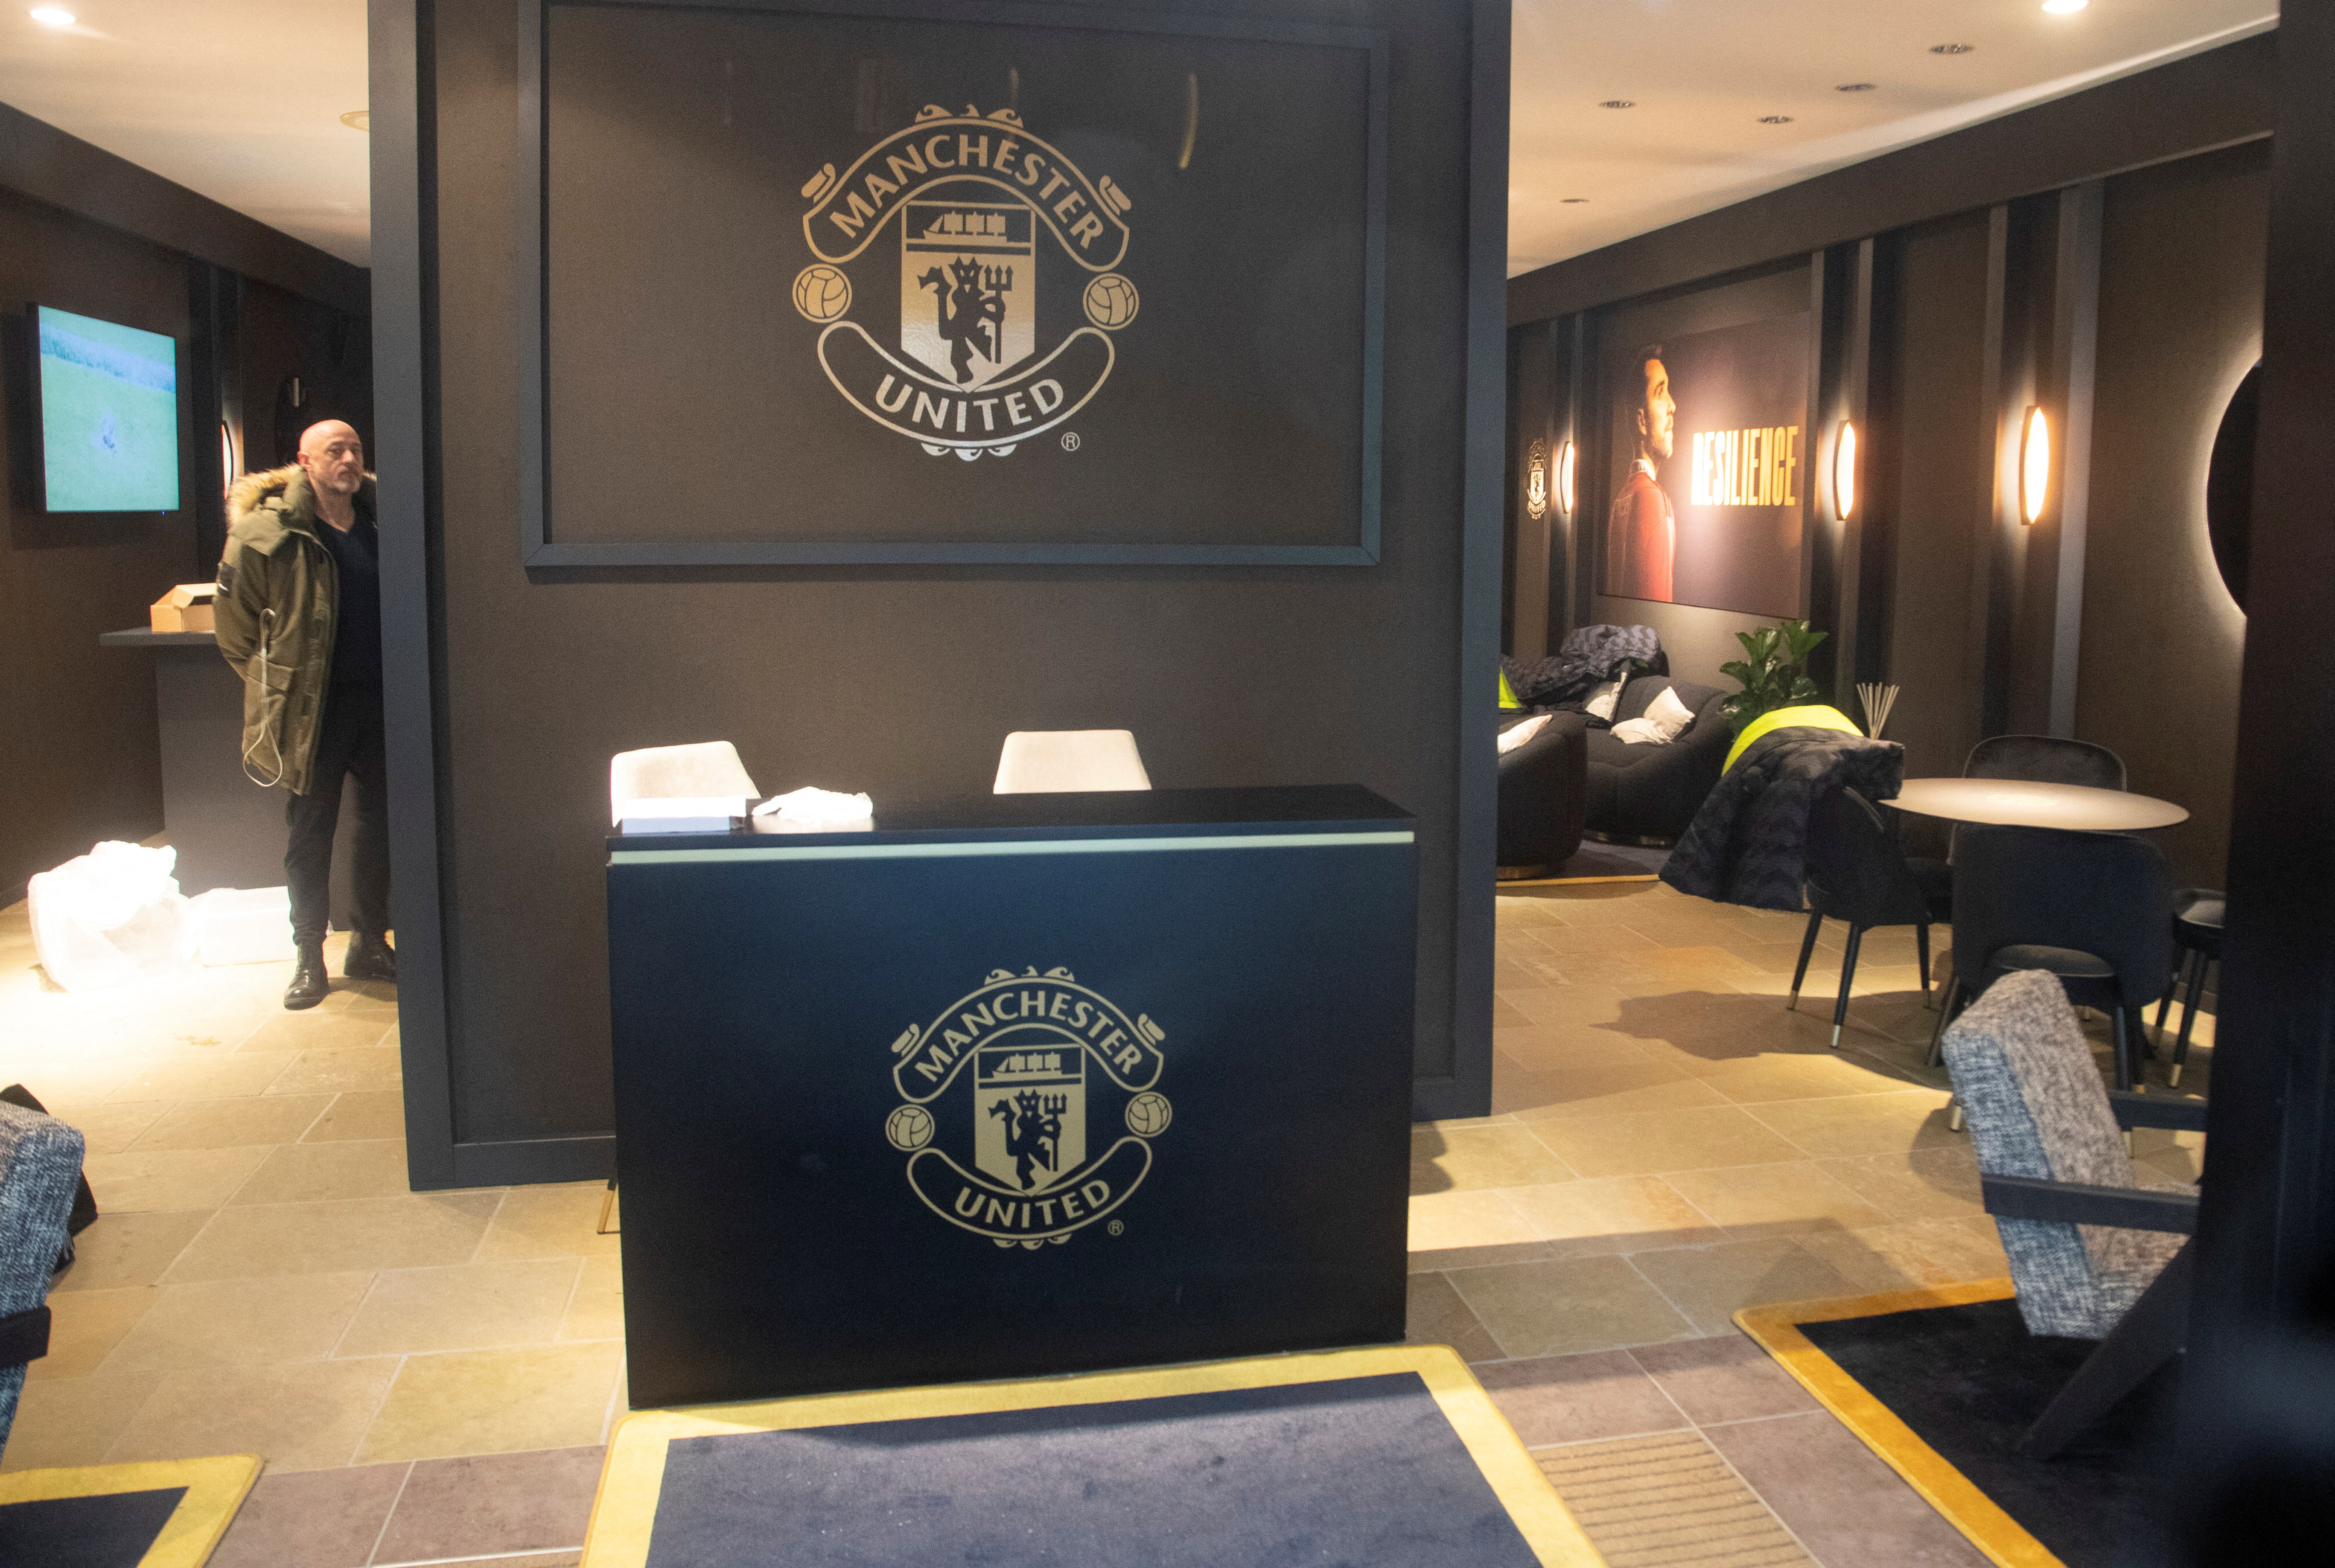 A lounge of British soccer club Manchester United during the World Economic Forum 2023 in Davos